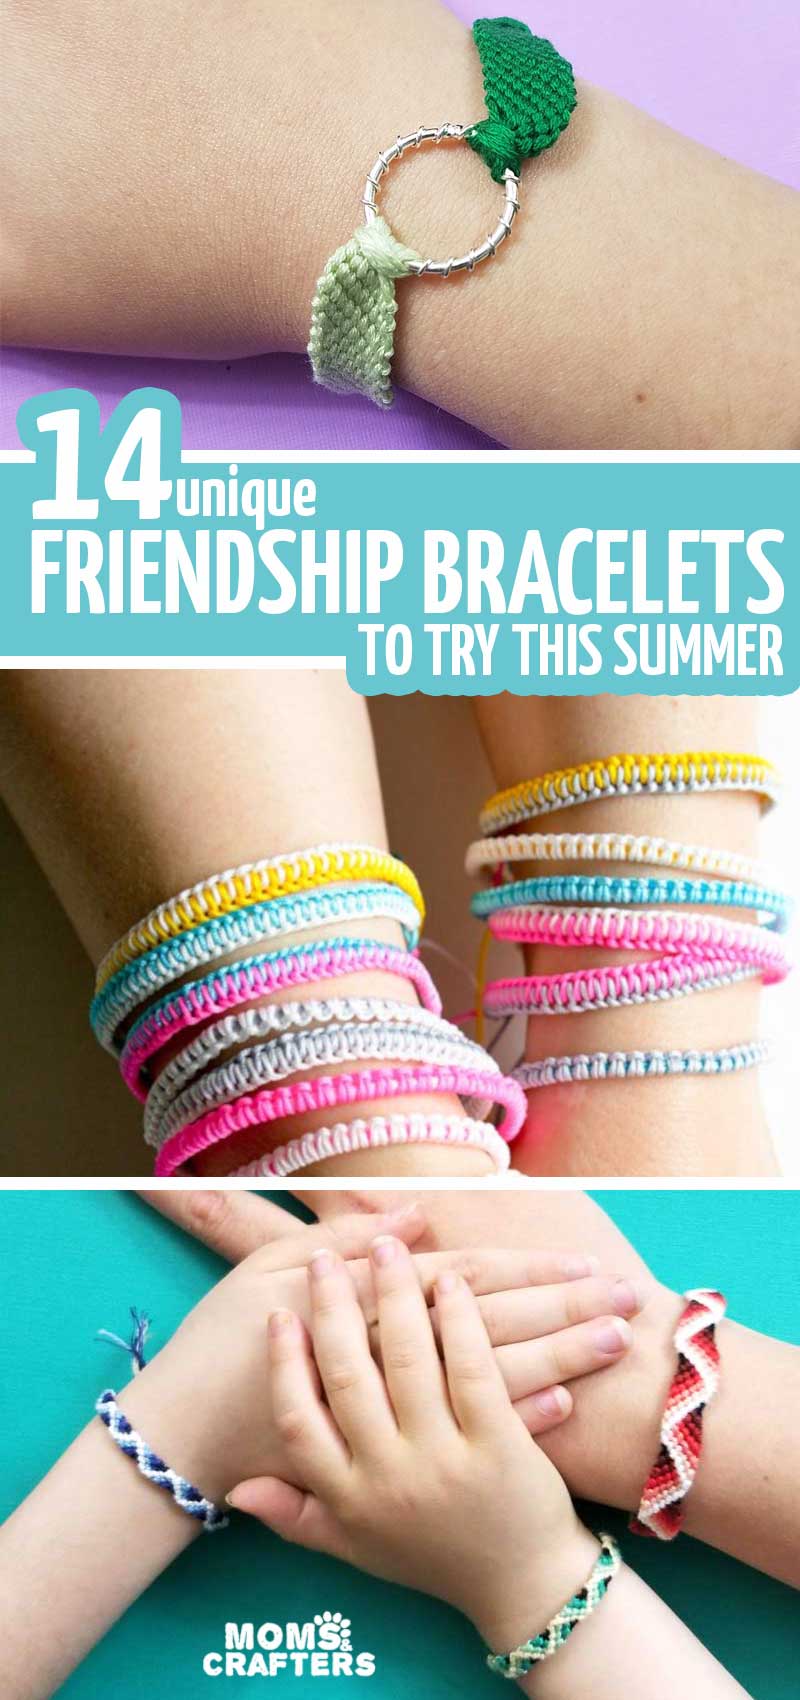 14 DIY frienship bracelets from string and beads and other cool ideas! These cool crafts are perfect summer crafts for teens and tweens and easy jewelry making projects for kids. 